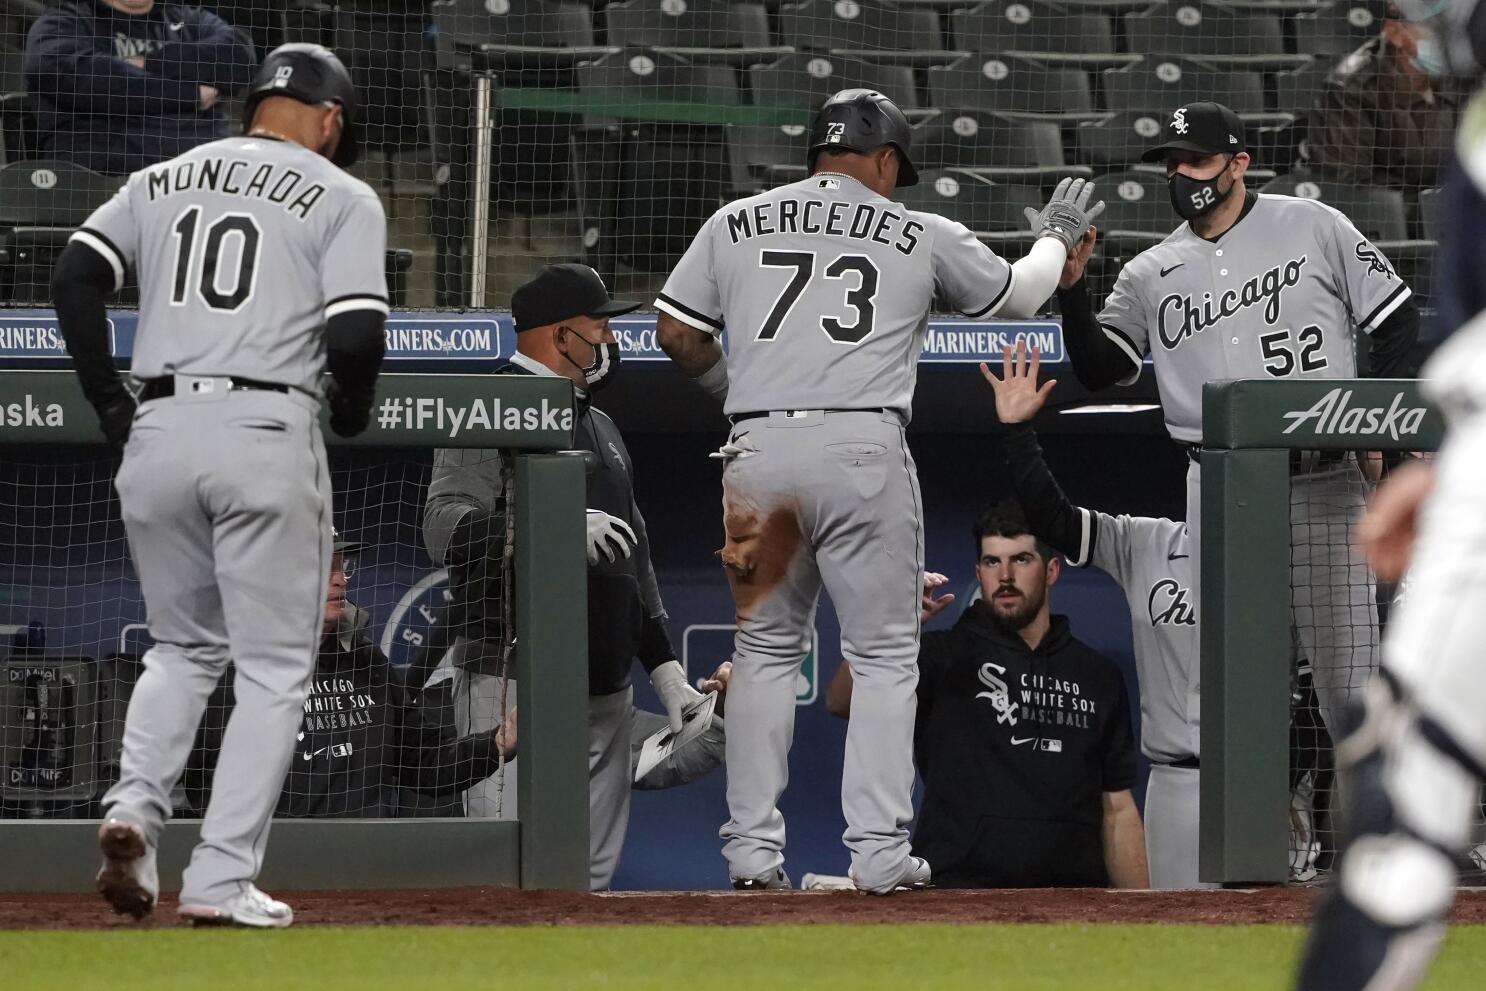 Mercedes gets 3 more hits, White Sox blank Mariners 6-0 - The San